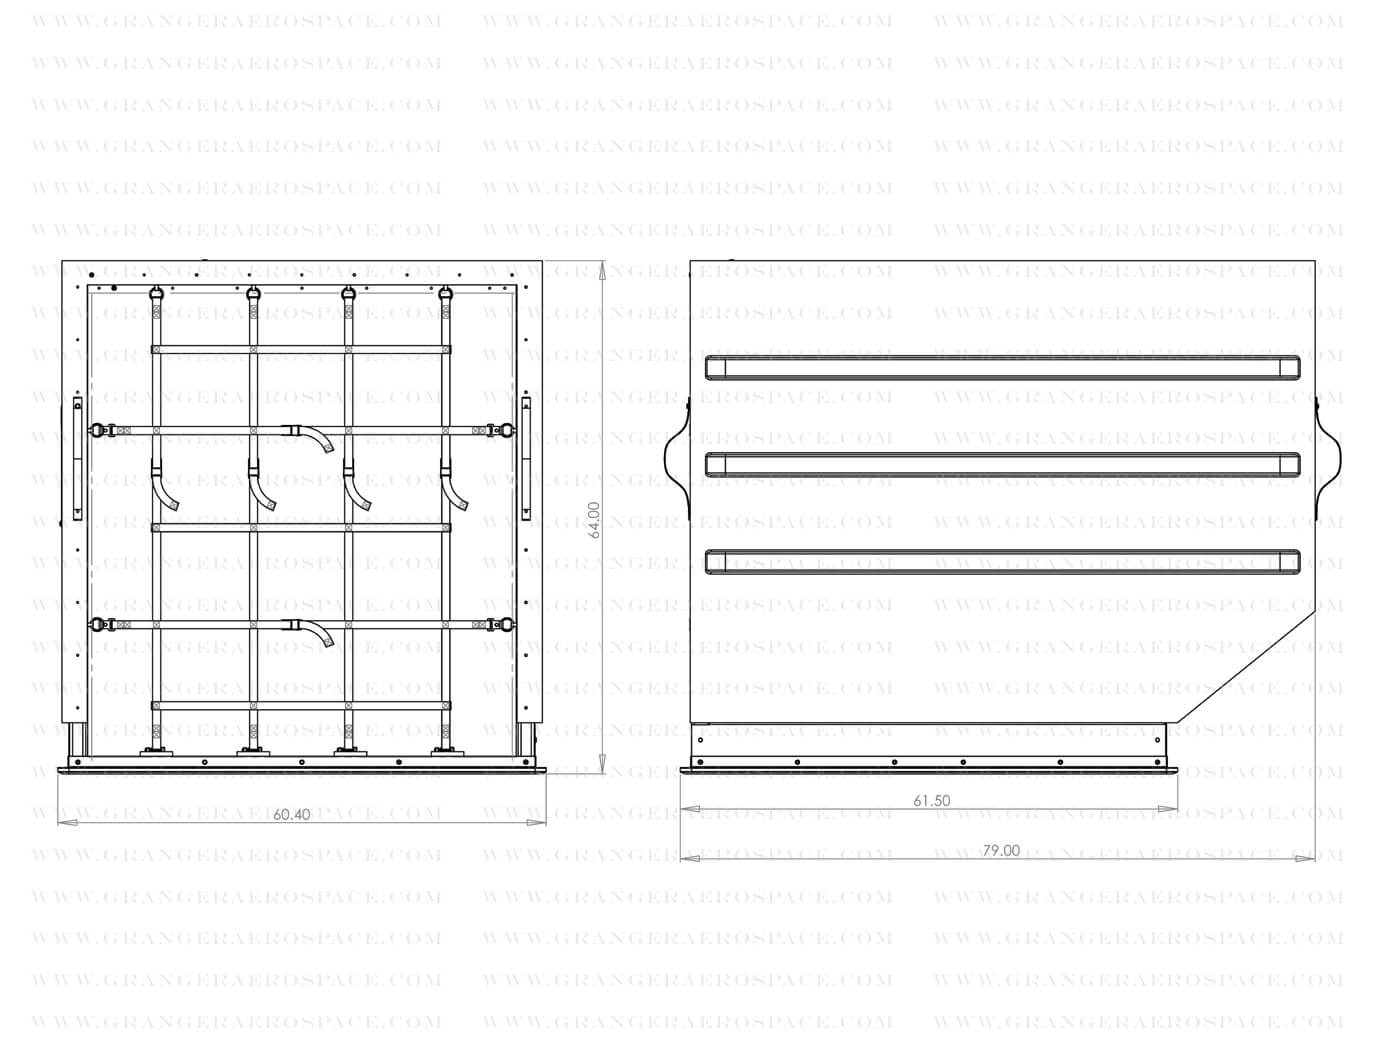 LD 3 Dimensions, LD 3 Air Cargo Container Dimensions, AKE dimensions, AKE ULD Container Dimensions